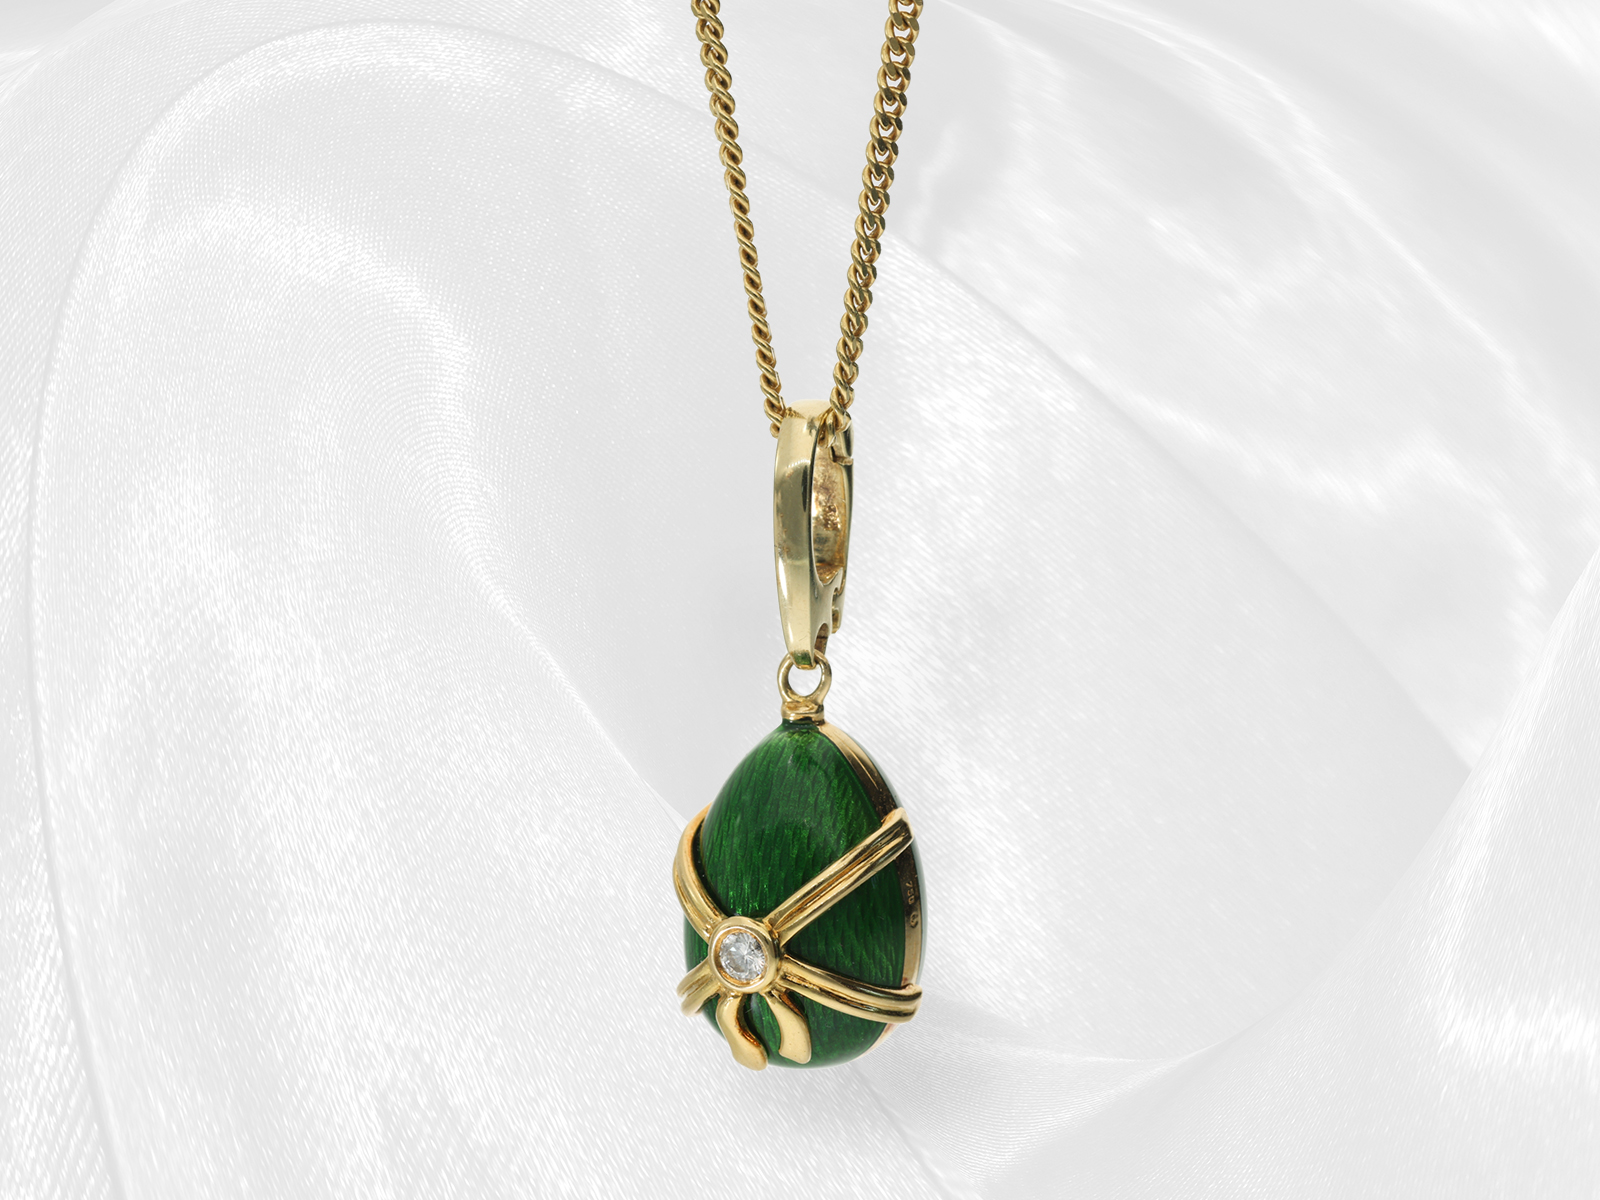 High-quality Fabergé enamel pendant with brilliant-cut diamonds, 18K gold, limited edition, with nec - Image 10 of 12